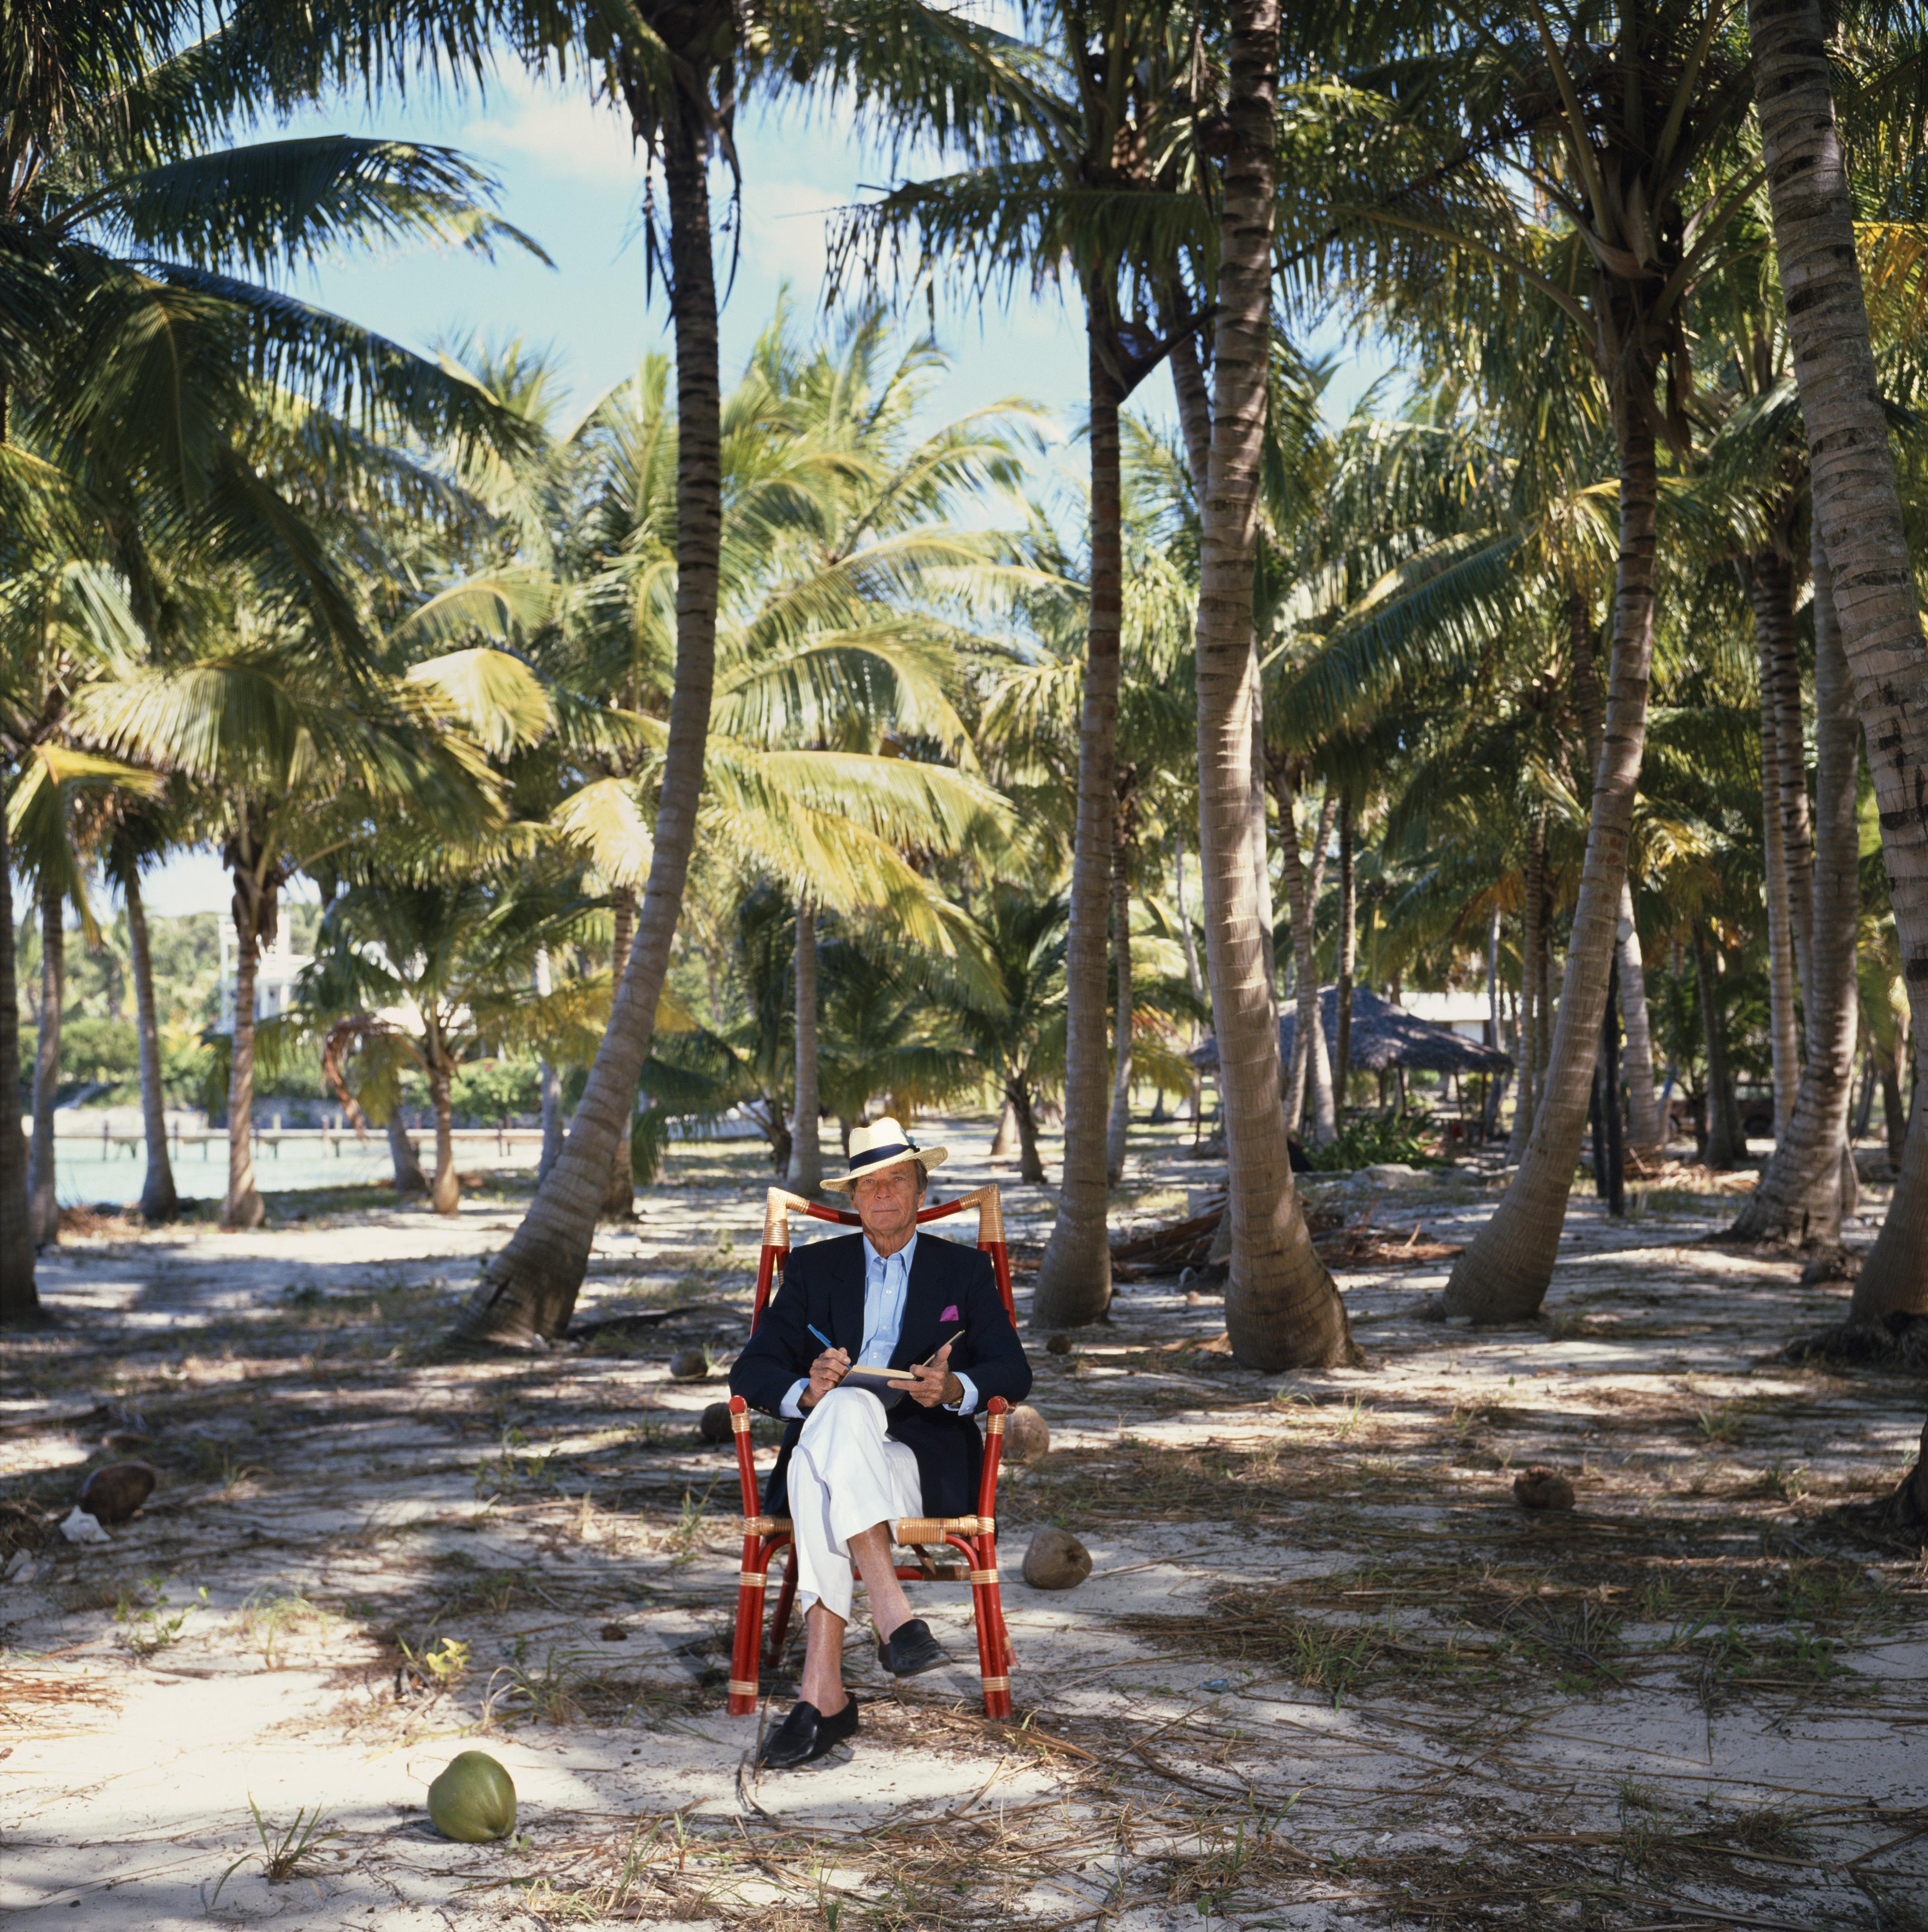 'Abaco Islander' 1986 Slim Aarons Limited Estate Edition

Author Chester Thompson at work in his coconut grove on the Abaco Islands of the Bahamas, March 1986. His ancester Wyannie Malone settled on the islands in 1783, founding Hope Town.